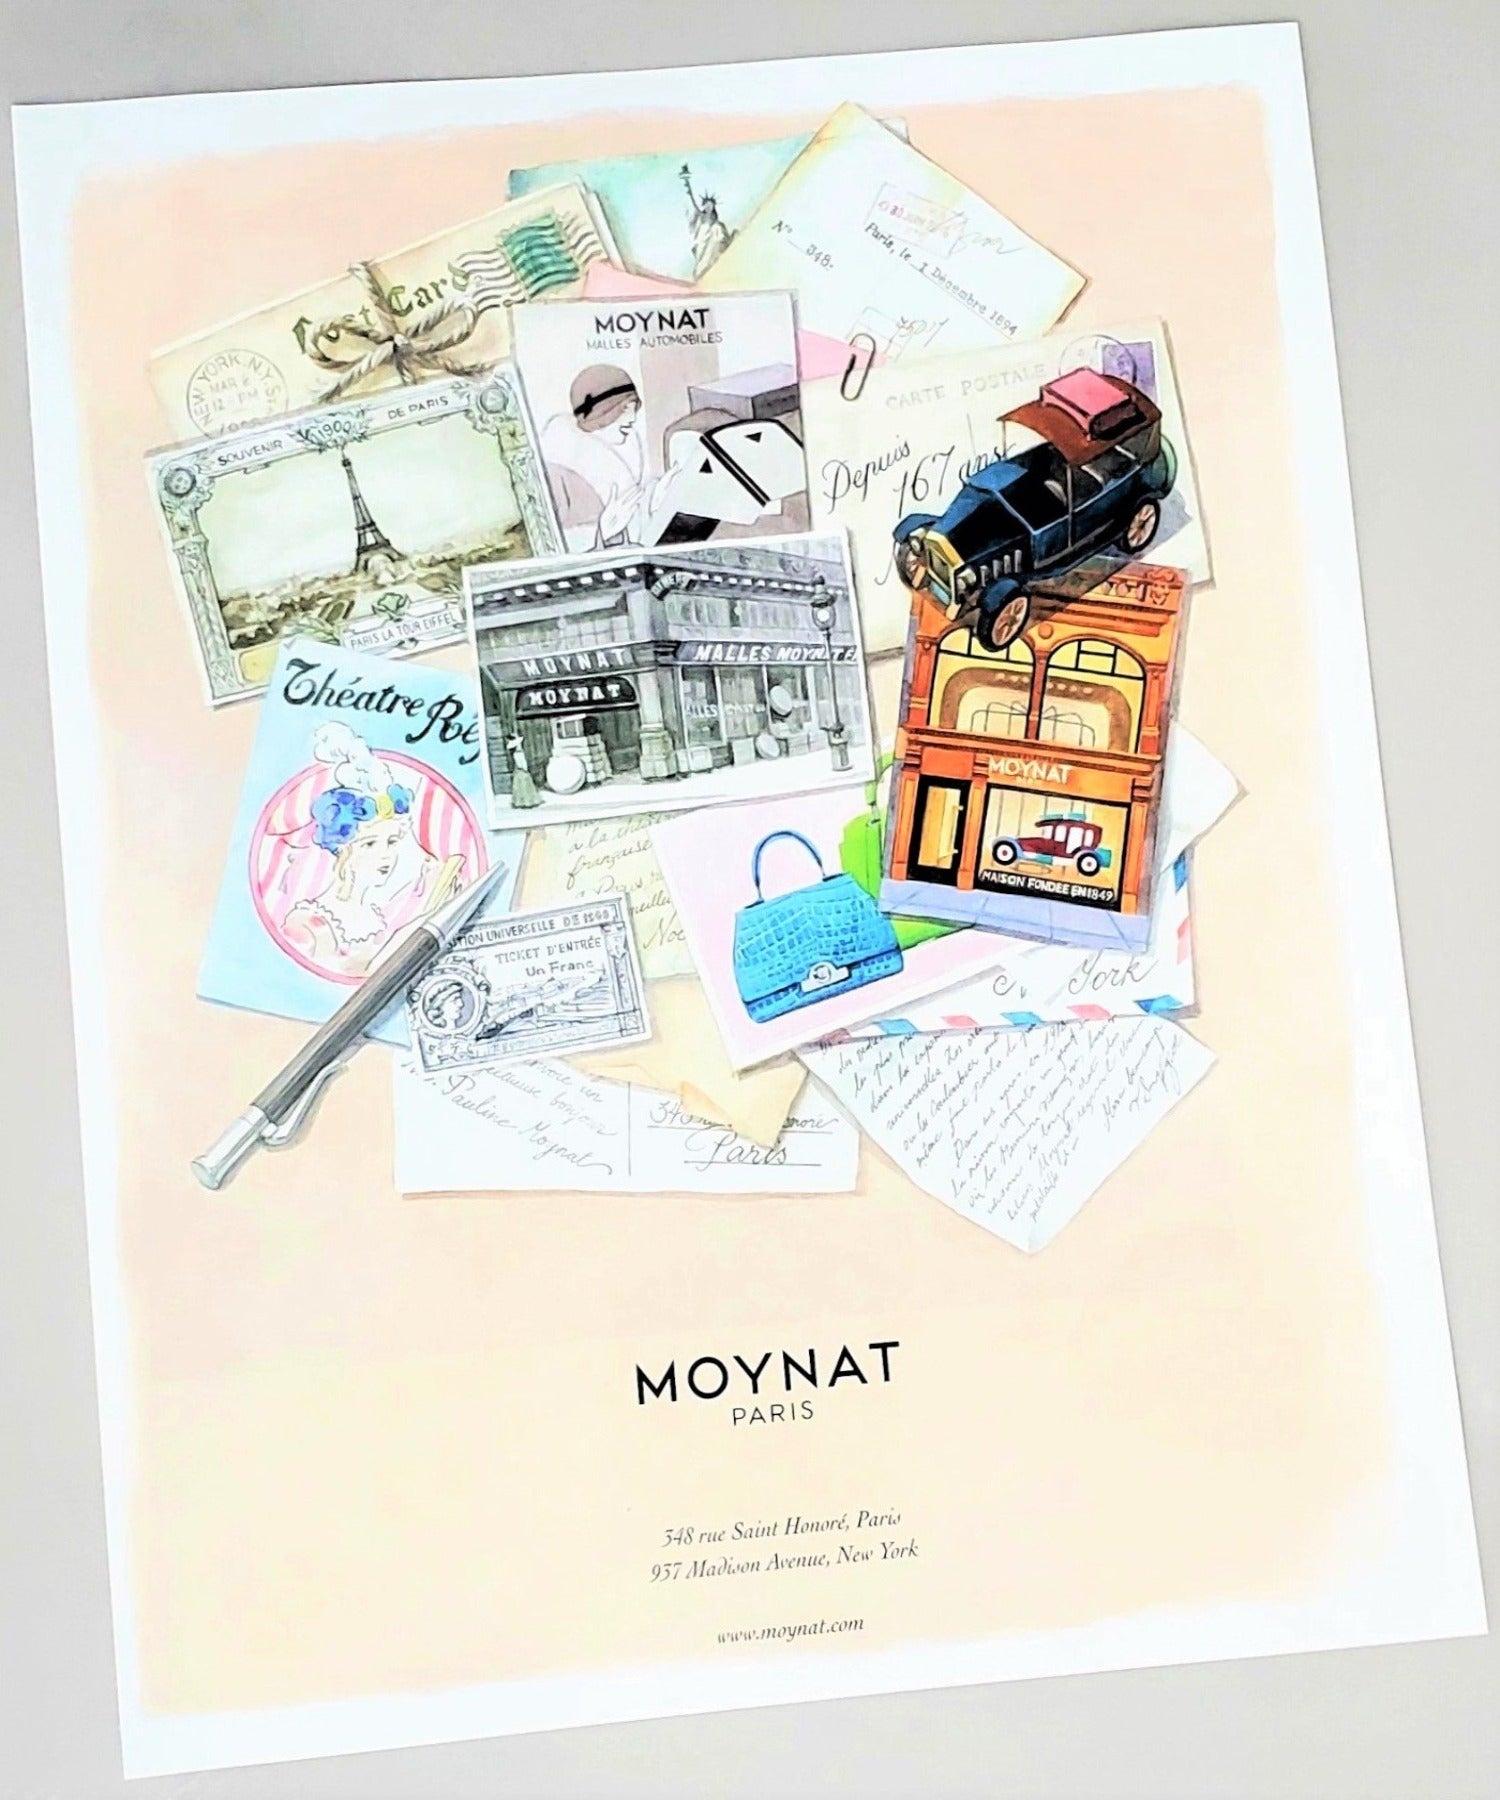 Original Moynat photograph advertisement page featured in September 2016 fashion issue of Vogue magazine available in area51gallery